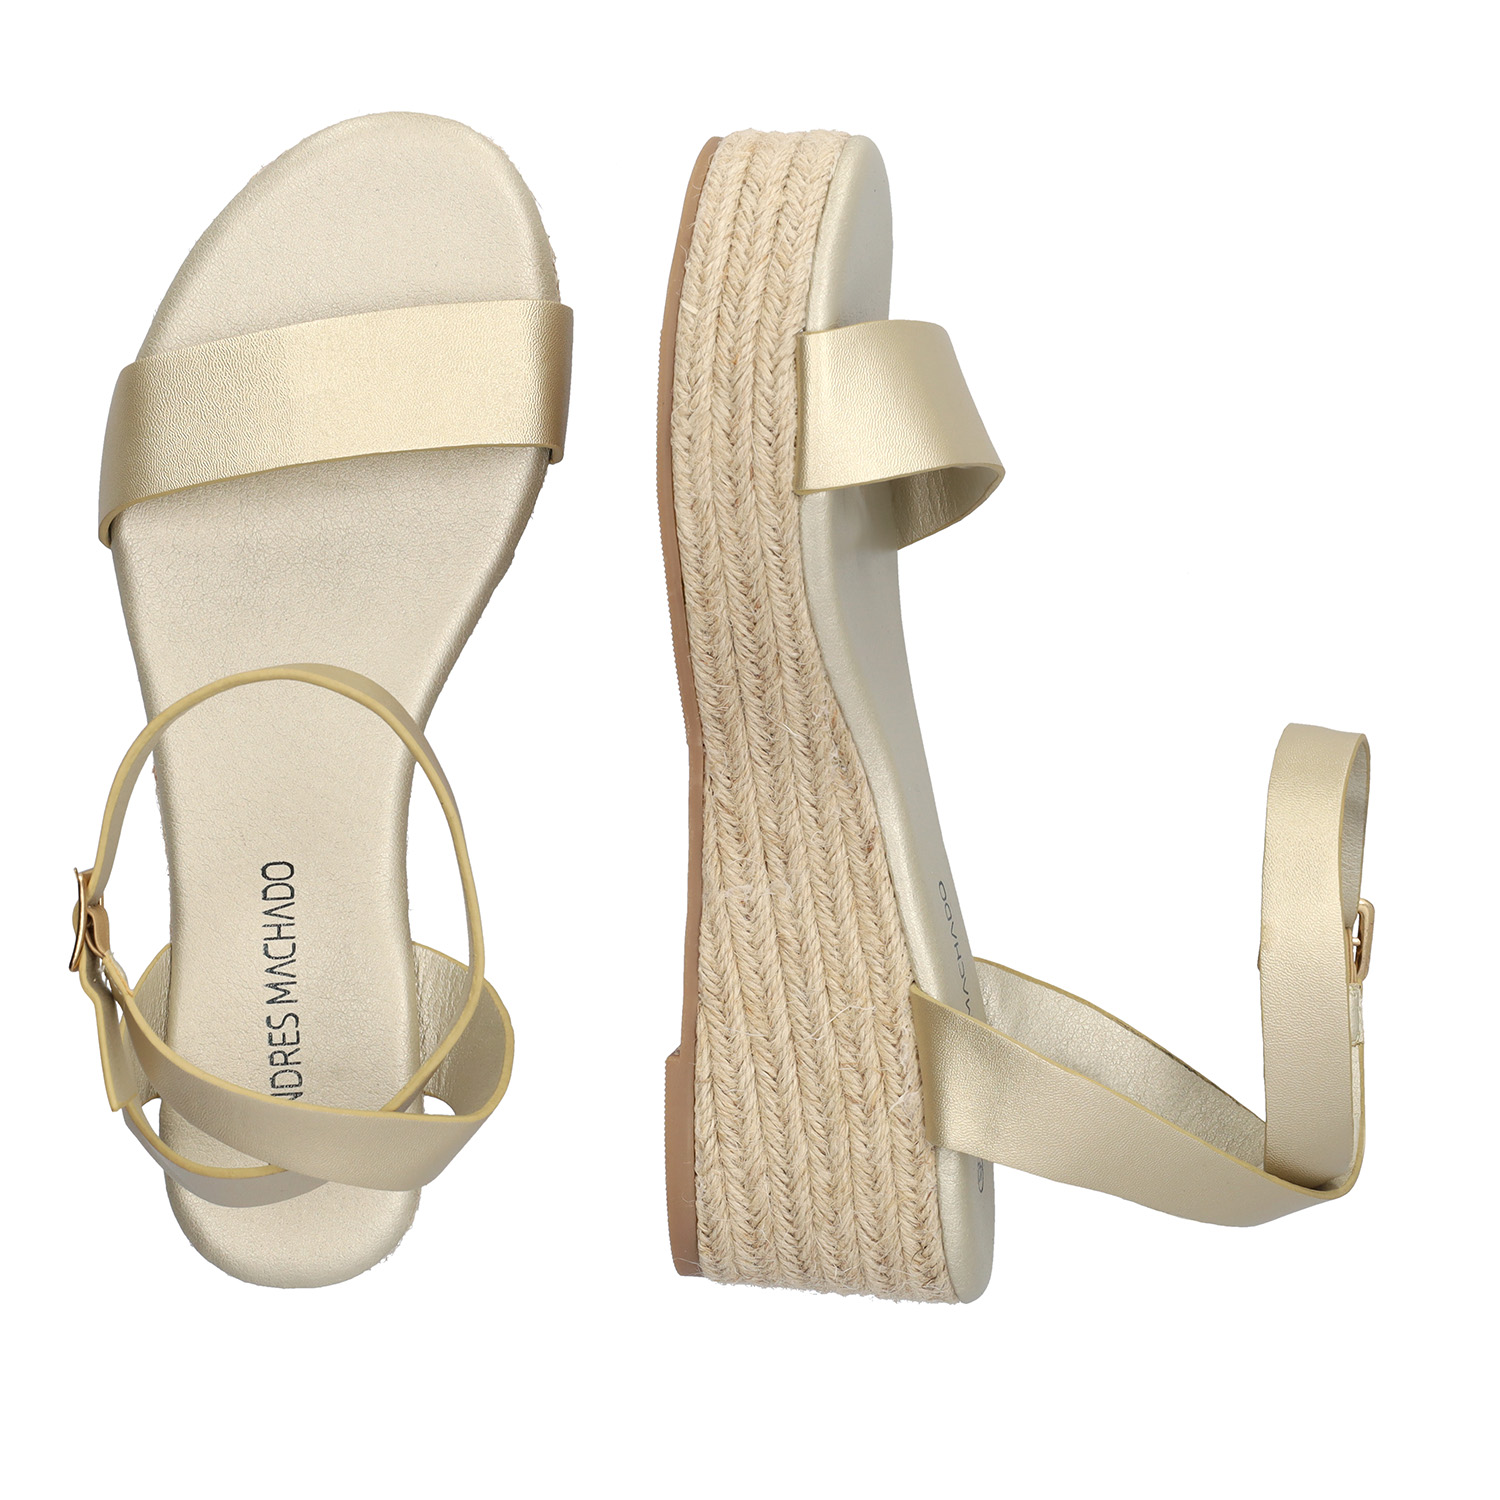 Gold soft sandals with a jute wedge 